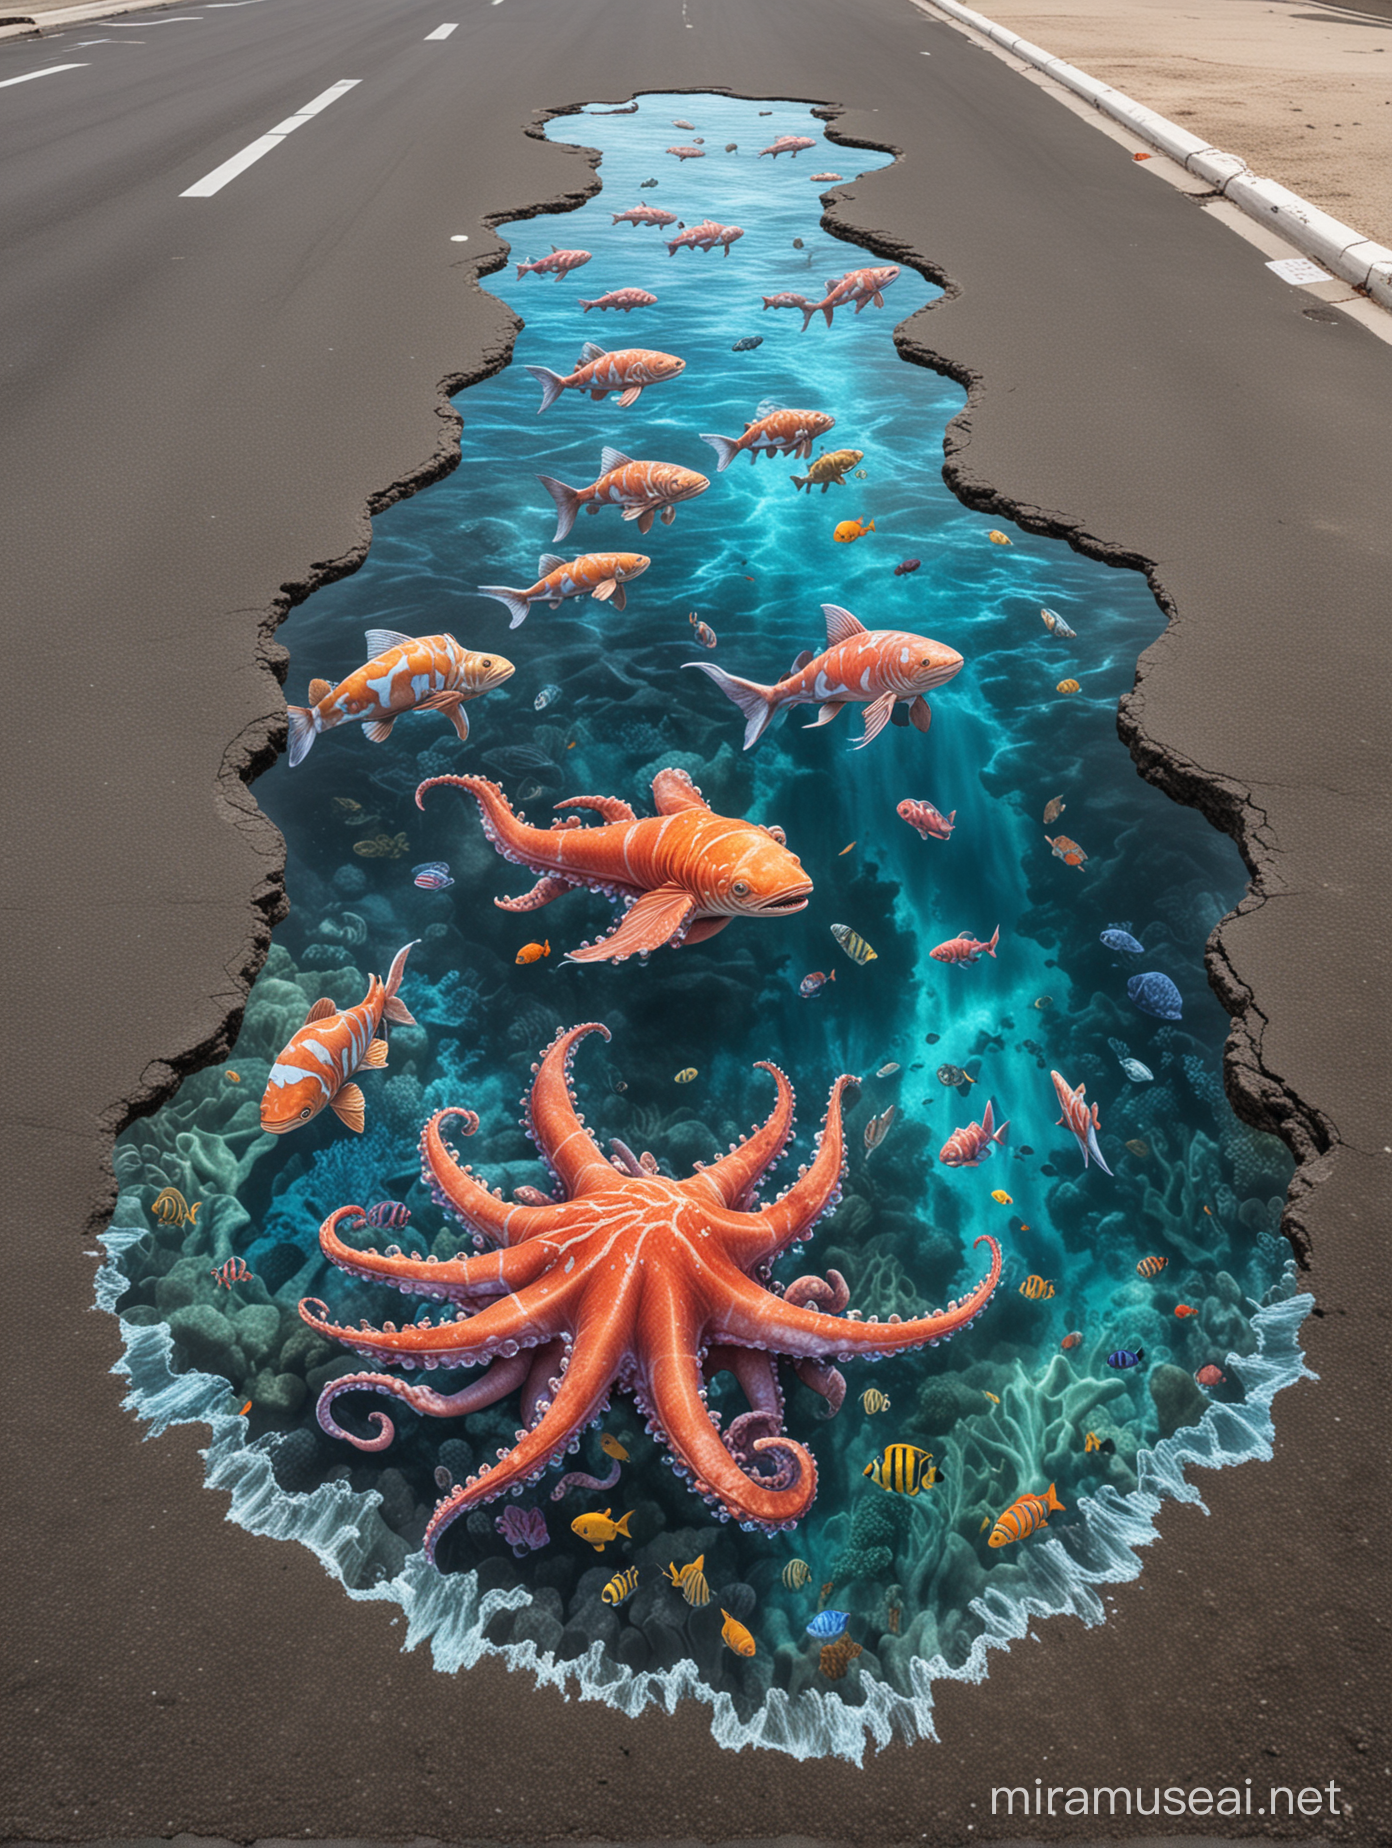 A hyperrealistic 3D chalk drawing on asphalt depicting a vibrant coral reef with colorful fish, sharks, and a giant octopus reaching out of the water. The asphalt cracks should appear as part of the ocean floor